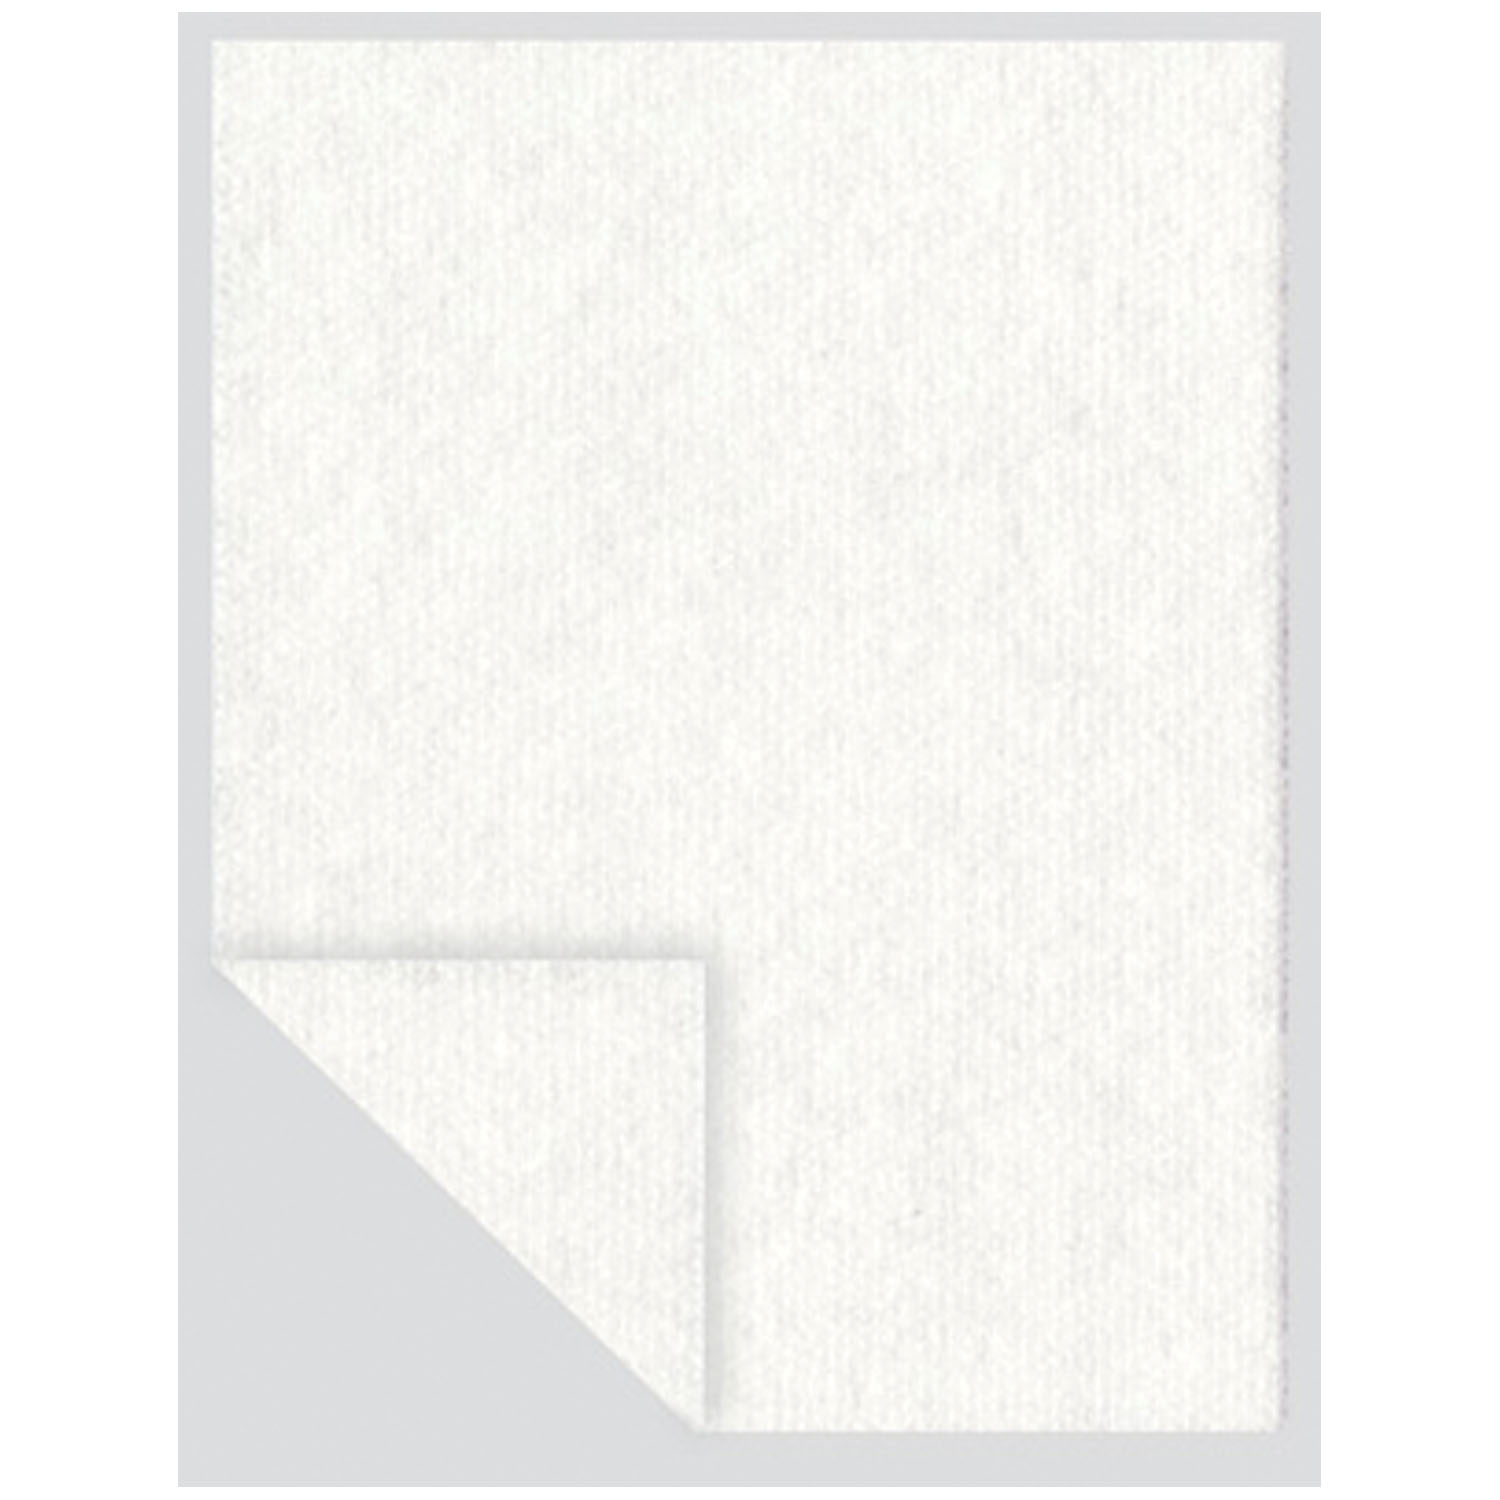 DUKAL NON-ADHERENT PAD WITH ADHESIVE : 7675033 BX                       $16.41 Stocked